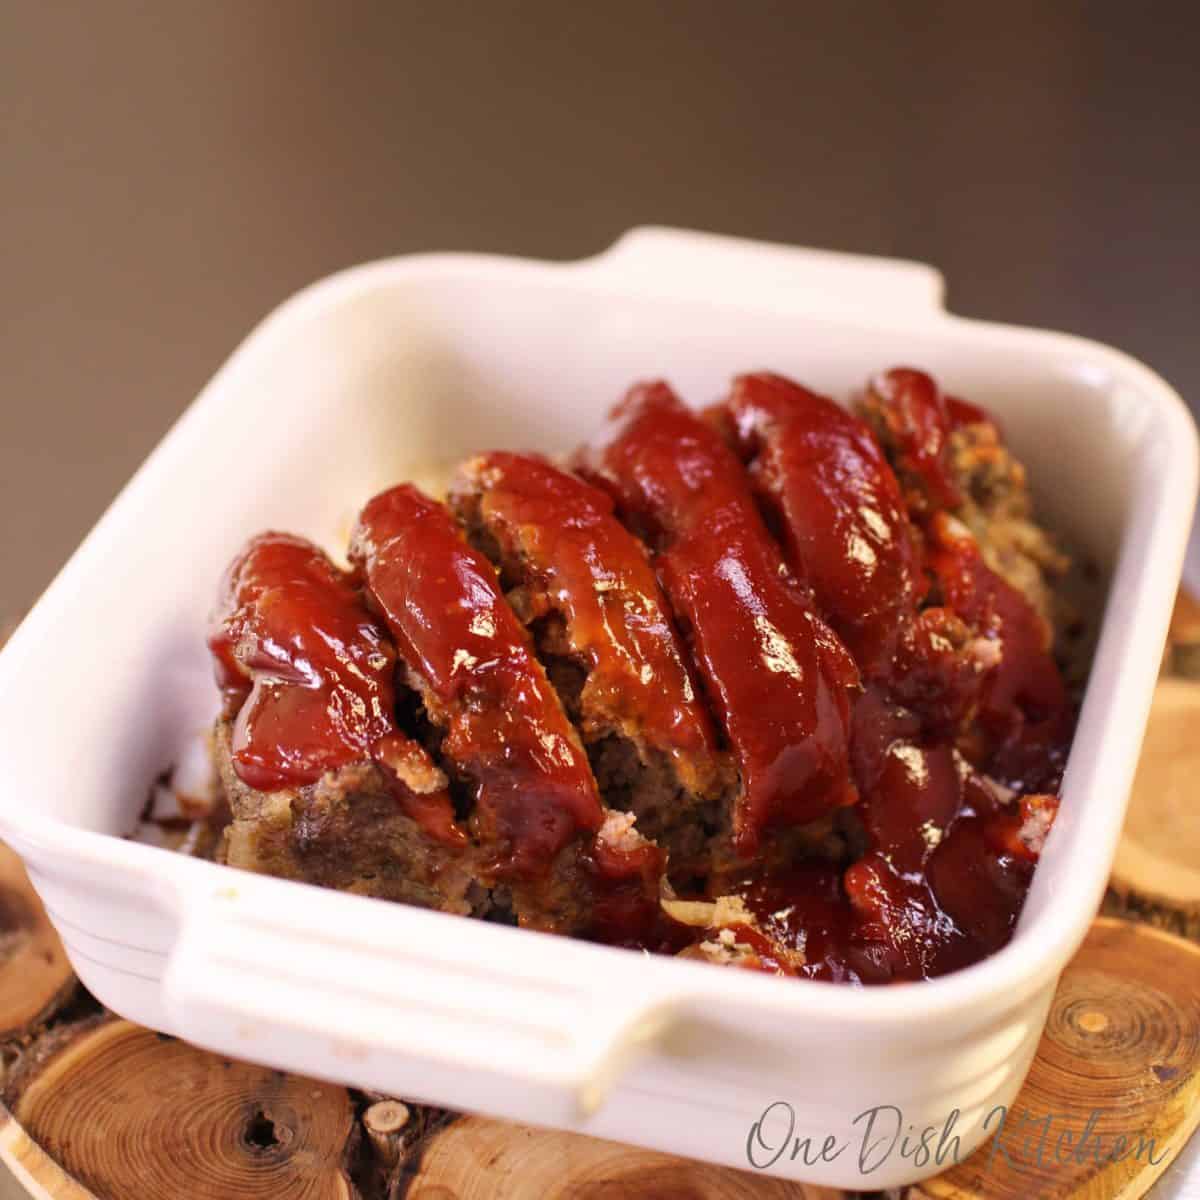 Slices of meatloaf topped with sauce in a small baking dish on a wooden trivet.